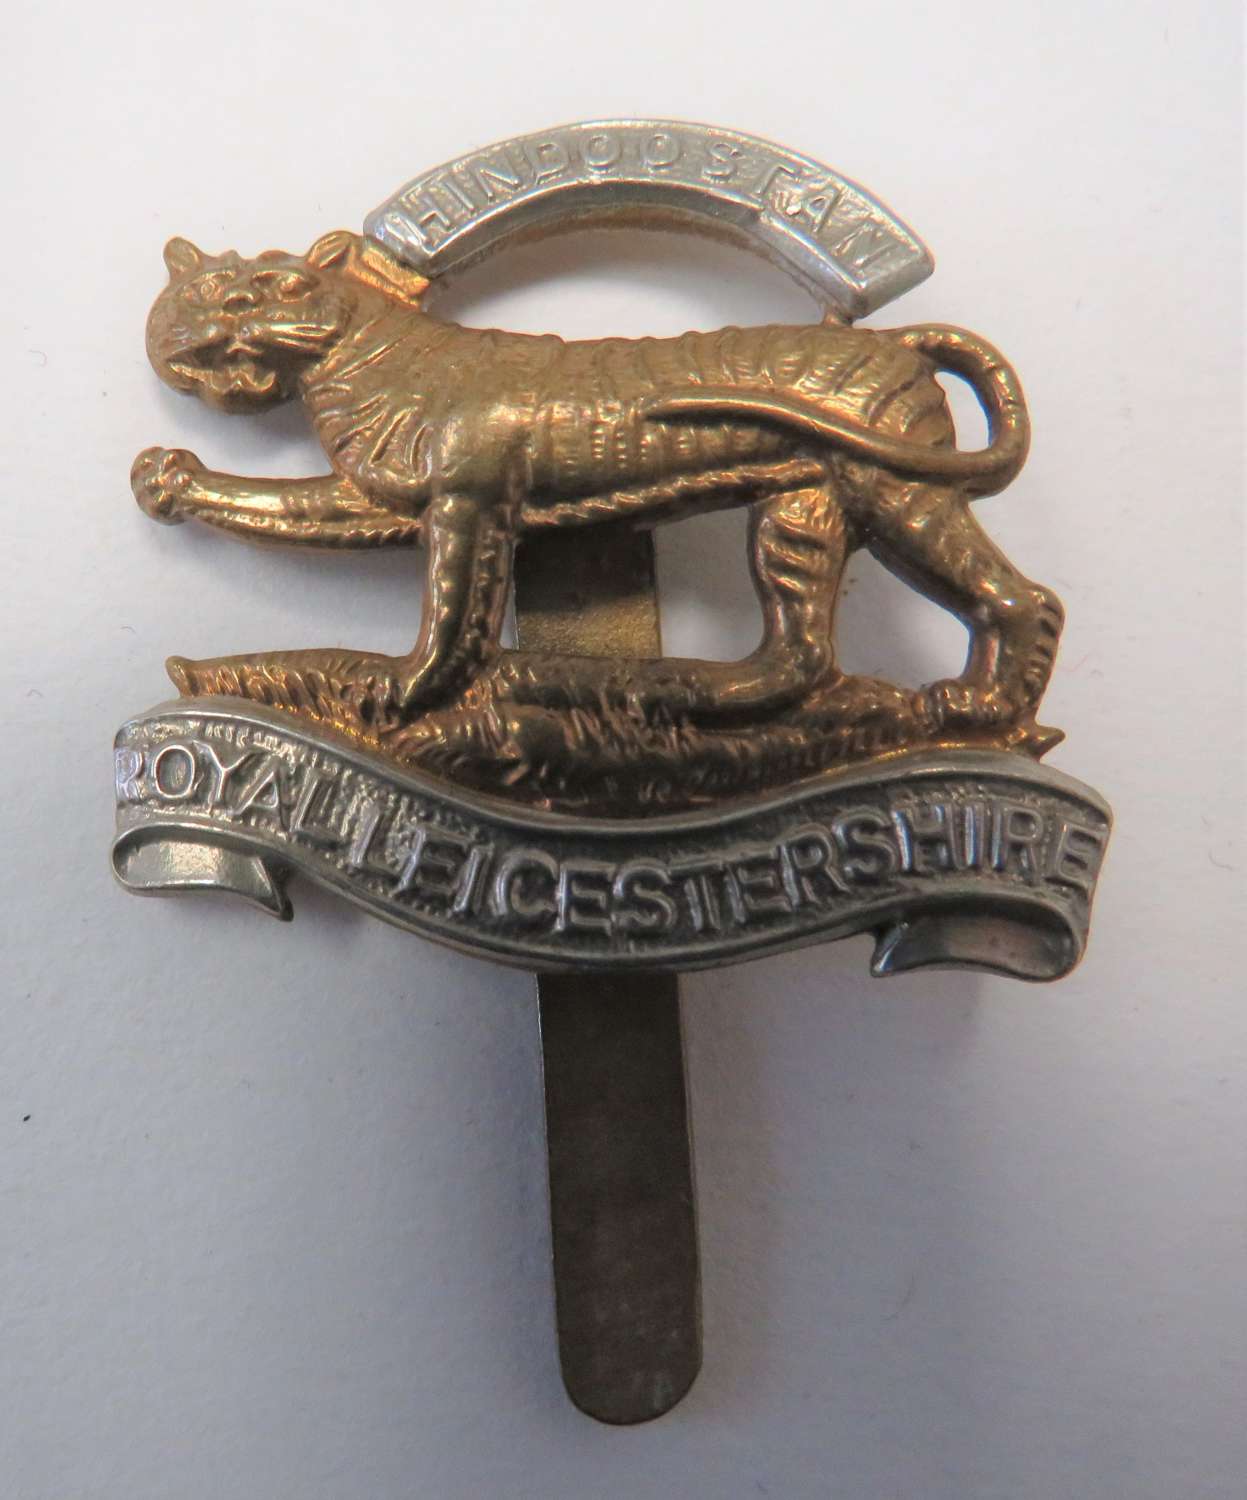 Royal Leicestershire Beret Badge